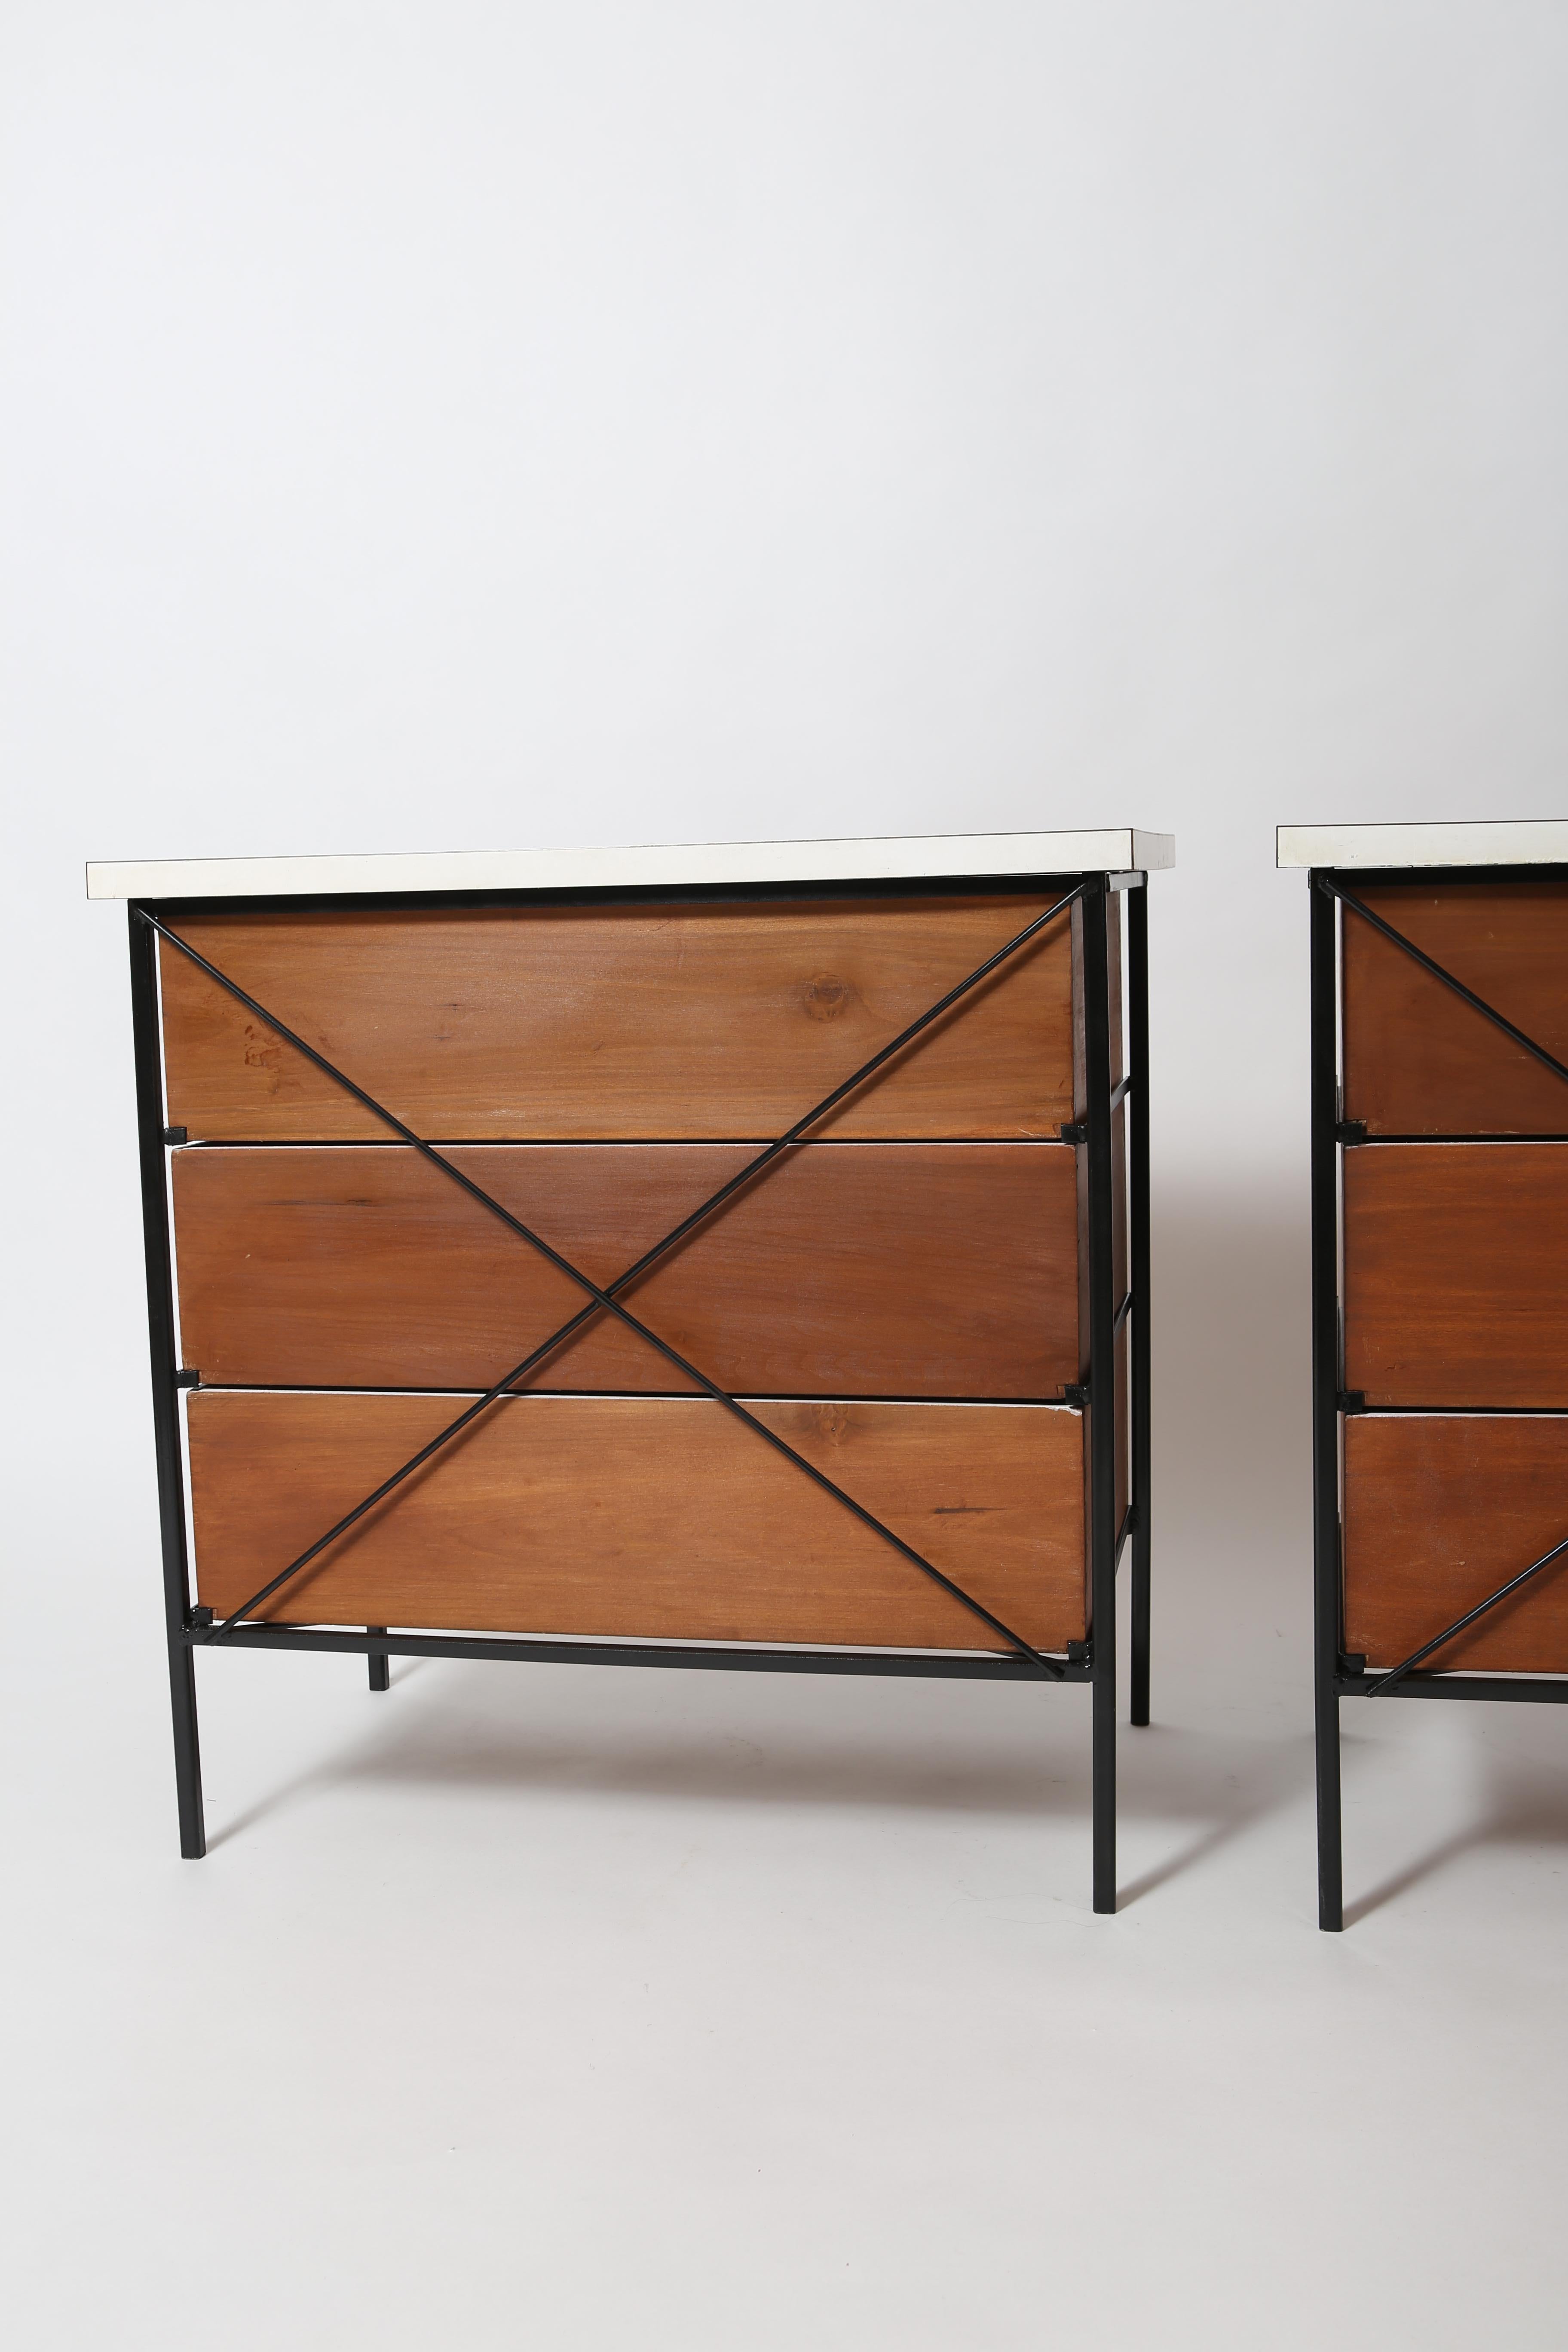 A pair of classic California modernist chests of drawers by Vista of California. Square steel tube frames are stunning from any angle. Original white Formica tops and refinished maple drawers. Chromed steel hardware.